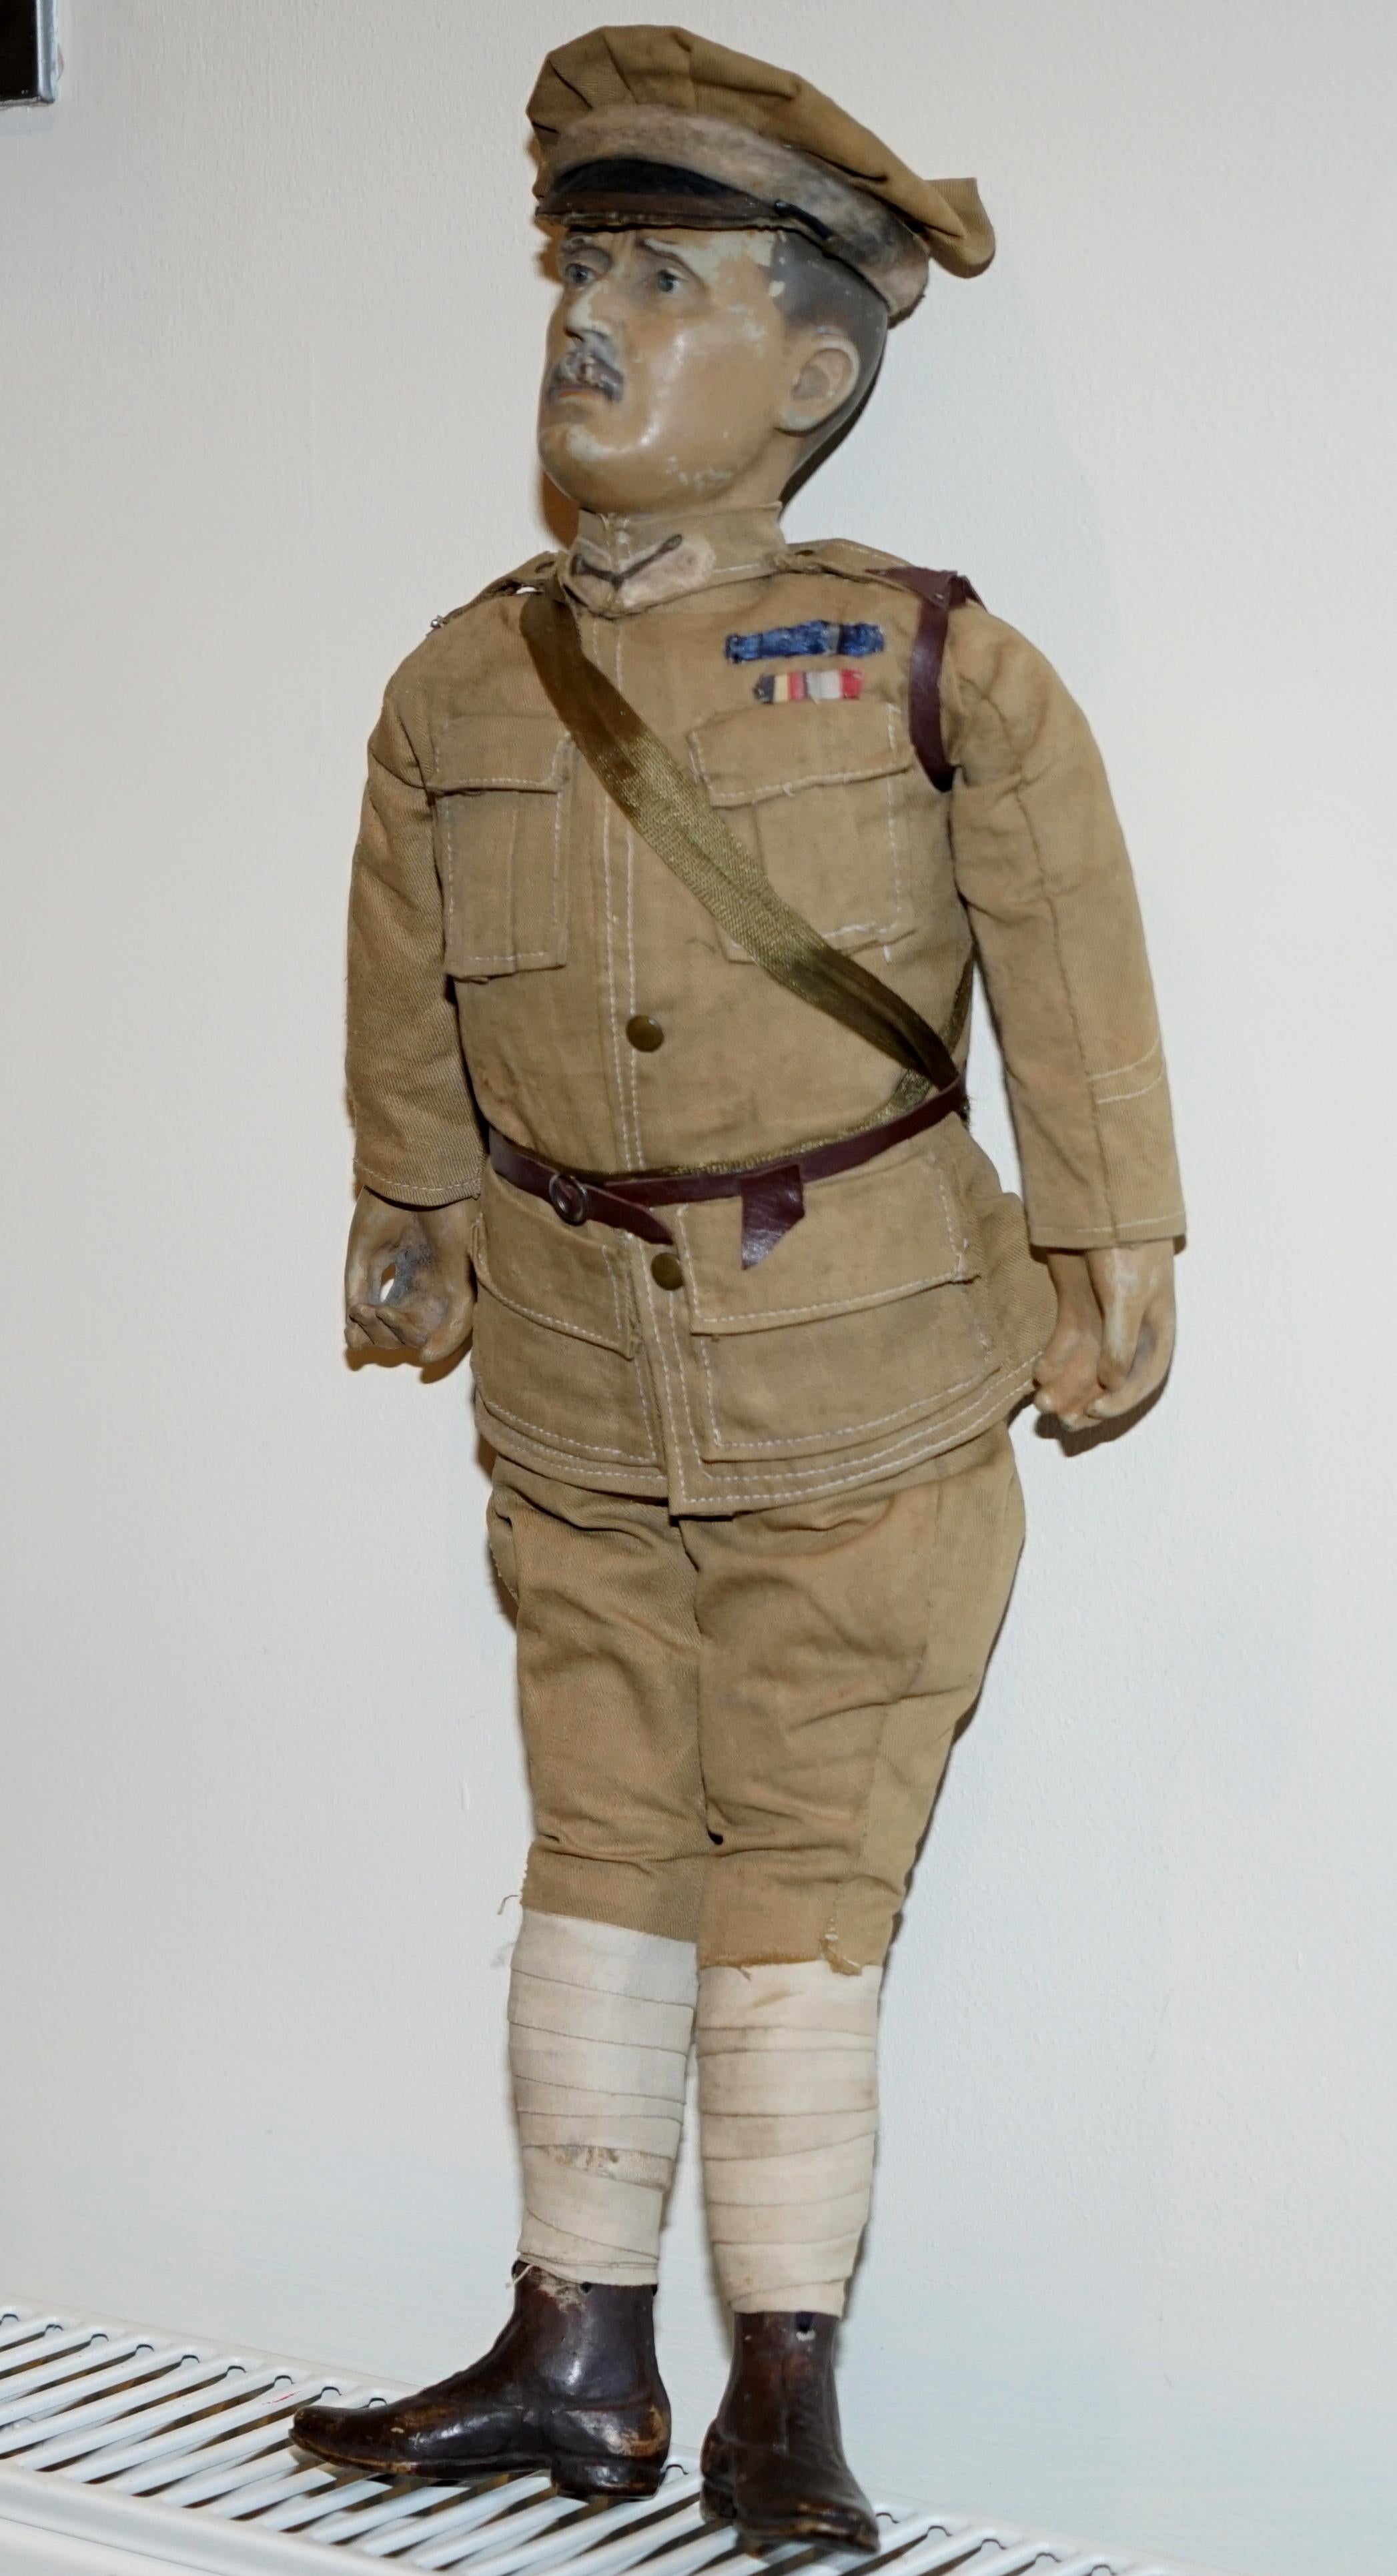 Wimbledon-Furniture
Wimbledon-Furniture is delighted to offer for auction this very rare circa 1898 to 1914 British Patriotic Propaganda Doll of Lord Horatio Kitchener. 

If the face looks familiar he was the chap on the Your Country Needs YOU